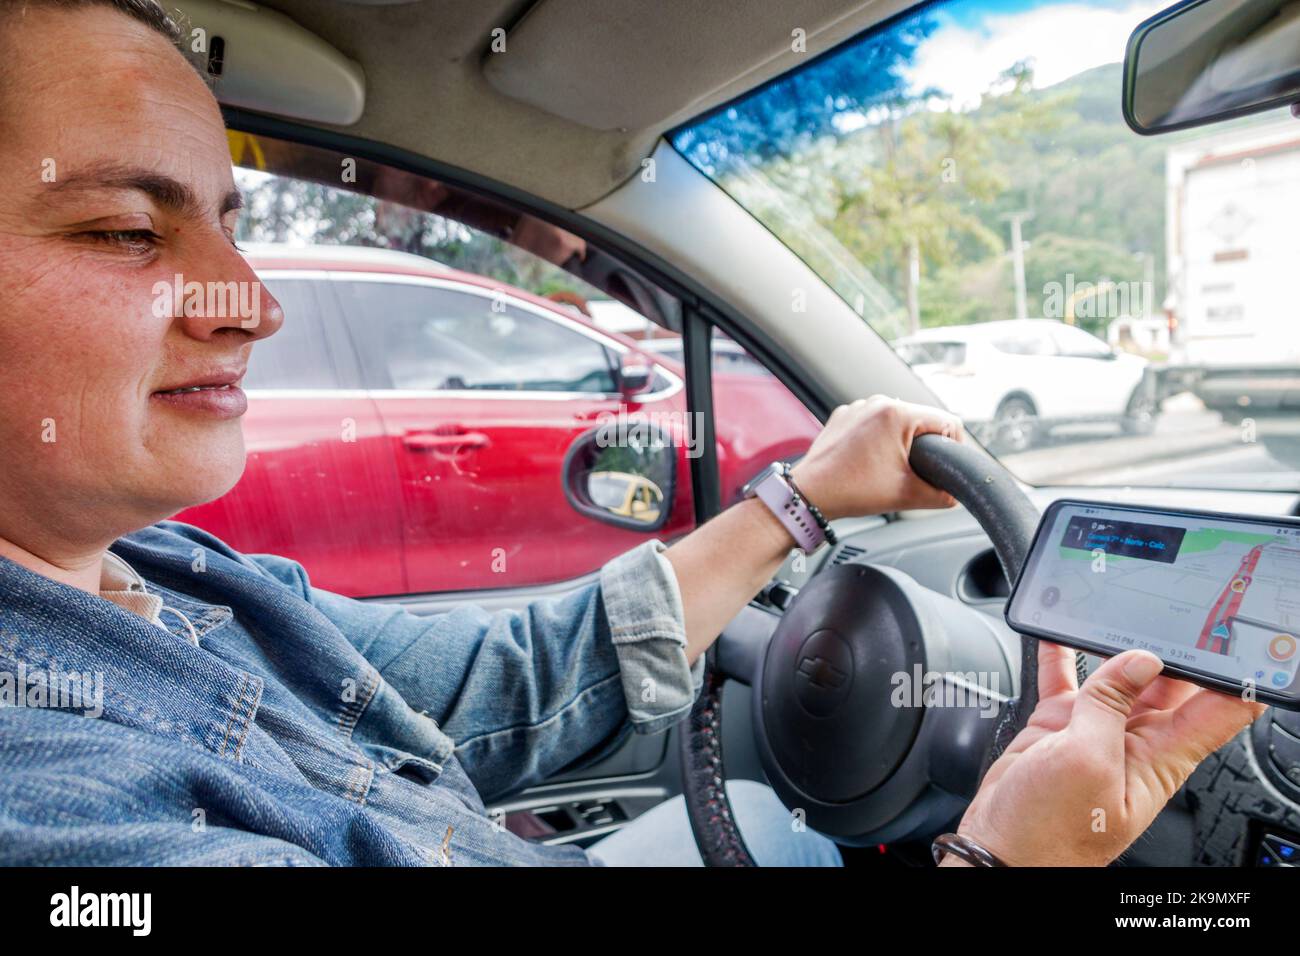 Bogota Colombia,Chapinero Uber driver driving inside interior car vehicle app,woman women female interior inside,smartphone mobile cell phone using re Stock Photo